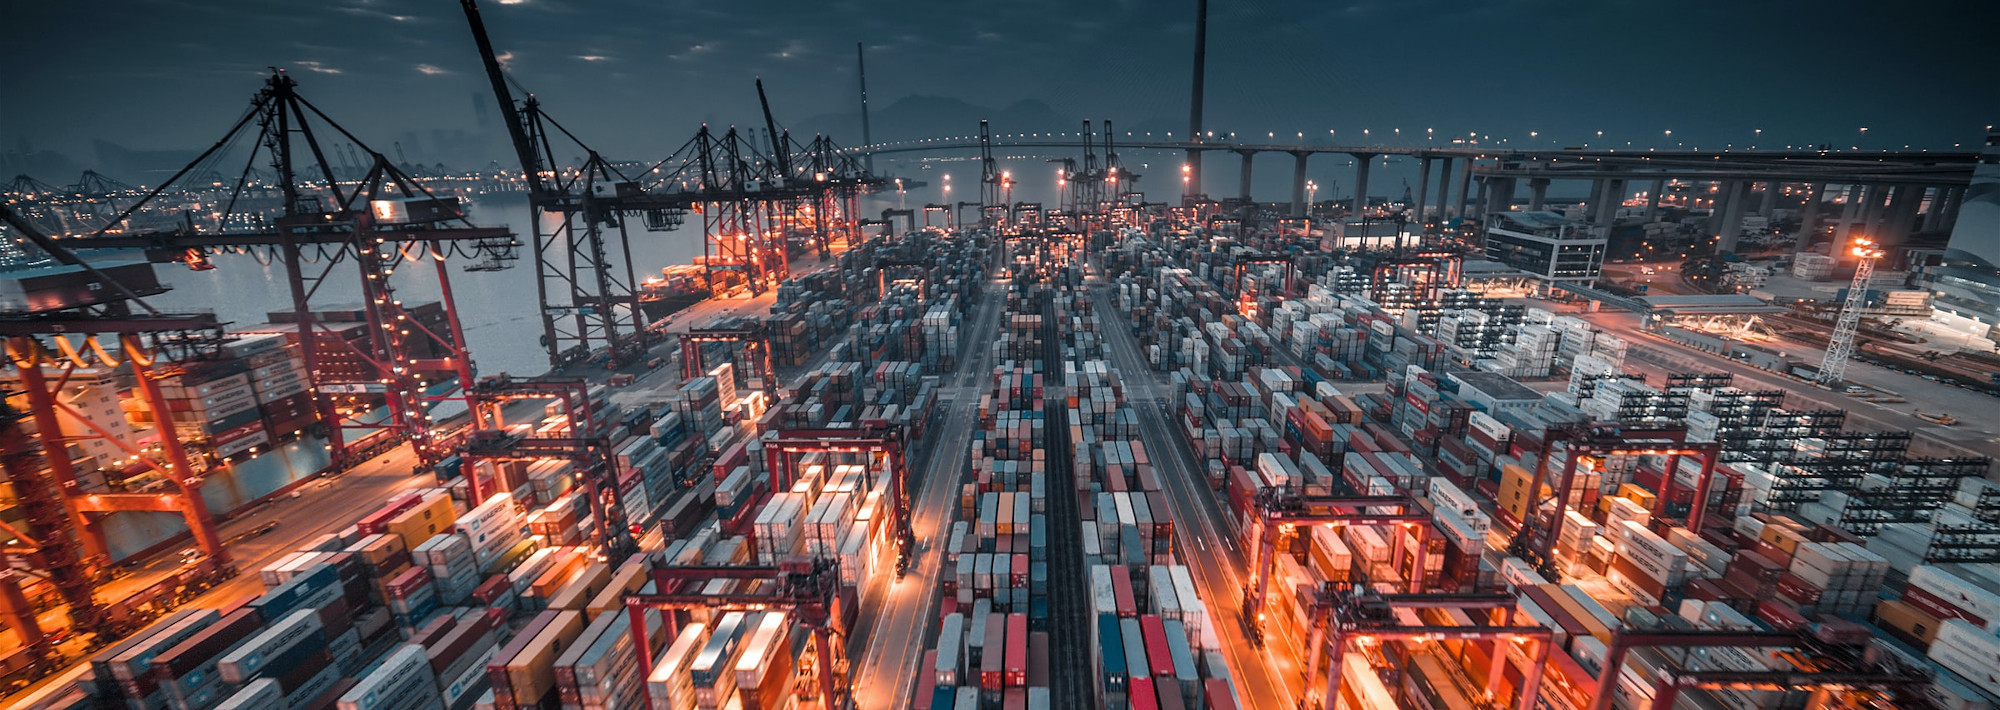 A busy container port at night, with hundreds, maybe thousands of containers